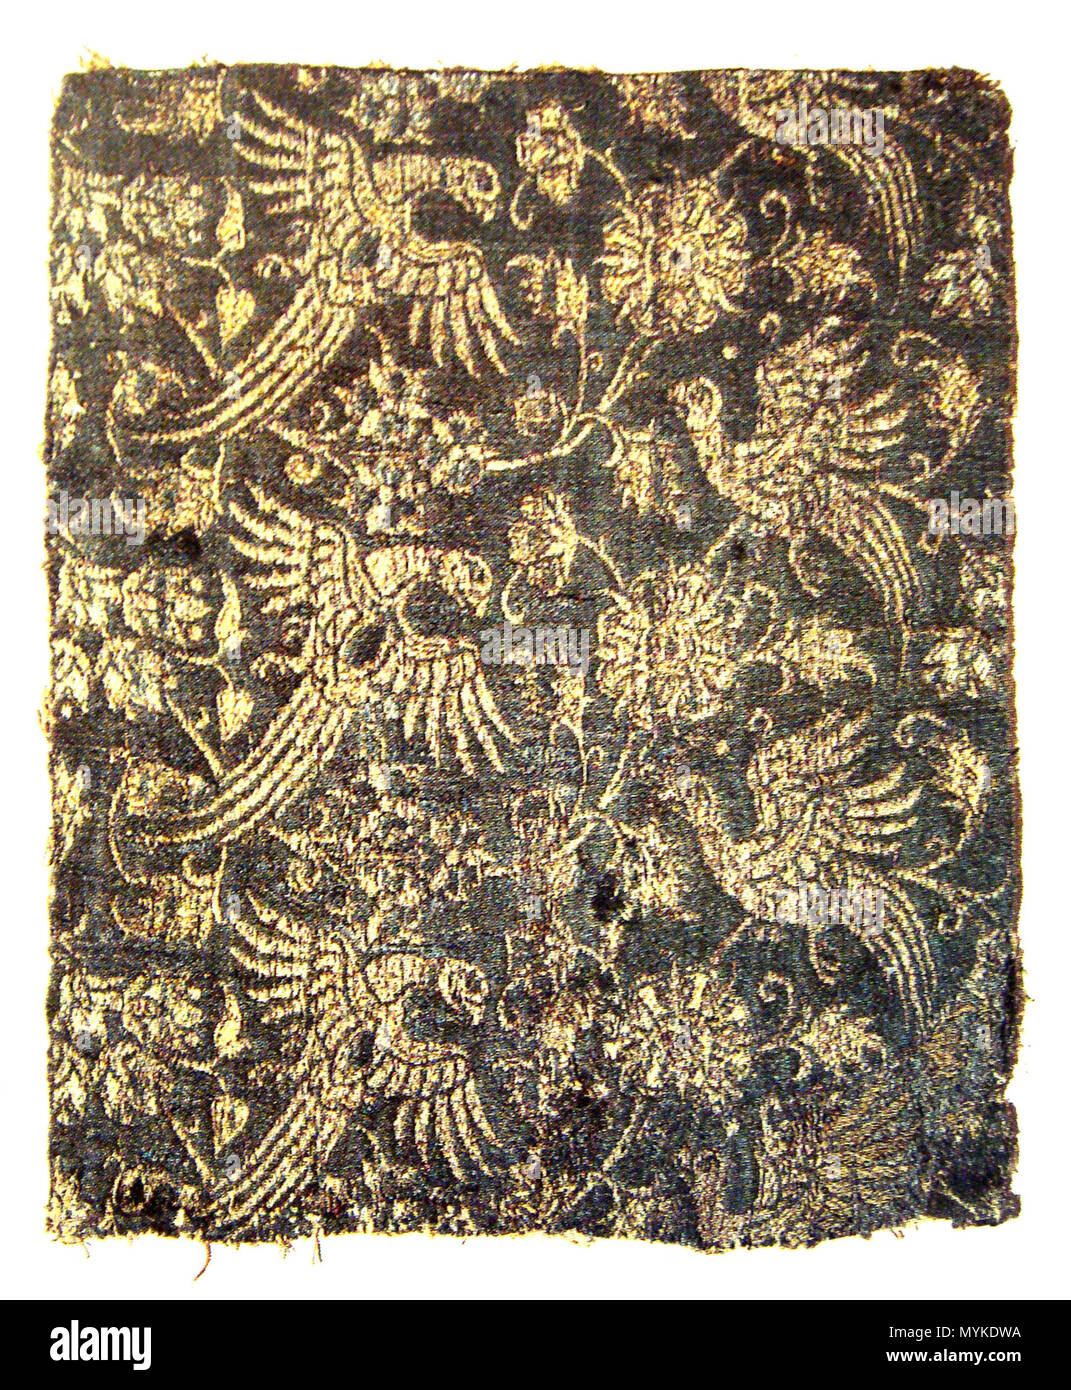 . English: Lampas textile silk and gold Italy second half of 14th century. second half of 14th century. Anonymous Italian artisan second half of 14th century 311 Lampas textile silk and gold Italy second half of 14th century Stock Photo